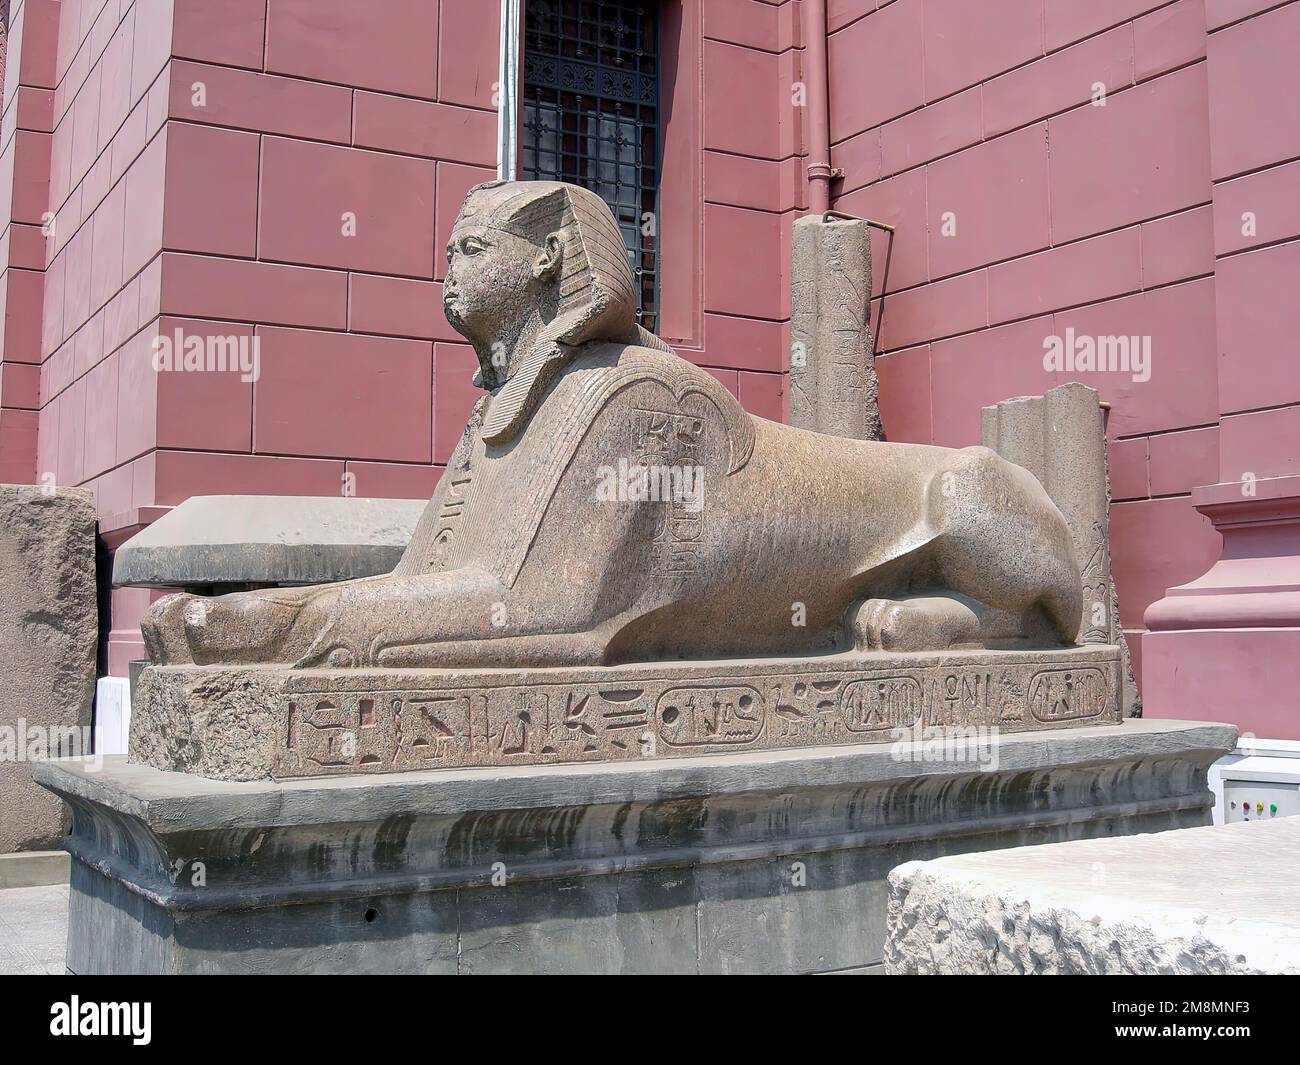 Statue of pharaoh Ramses II in the outer gardens of the Egyptian museum in Cairo, Egypt Stock Photo